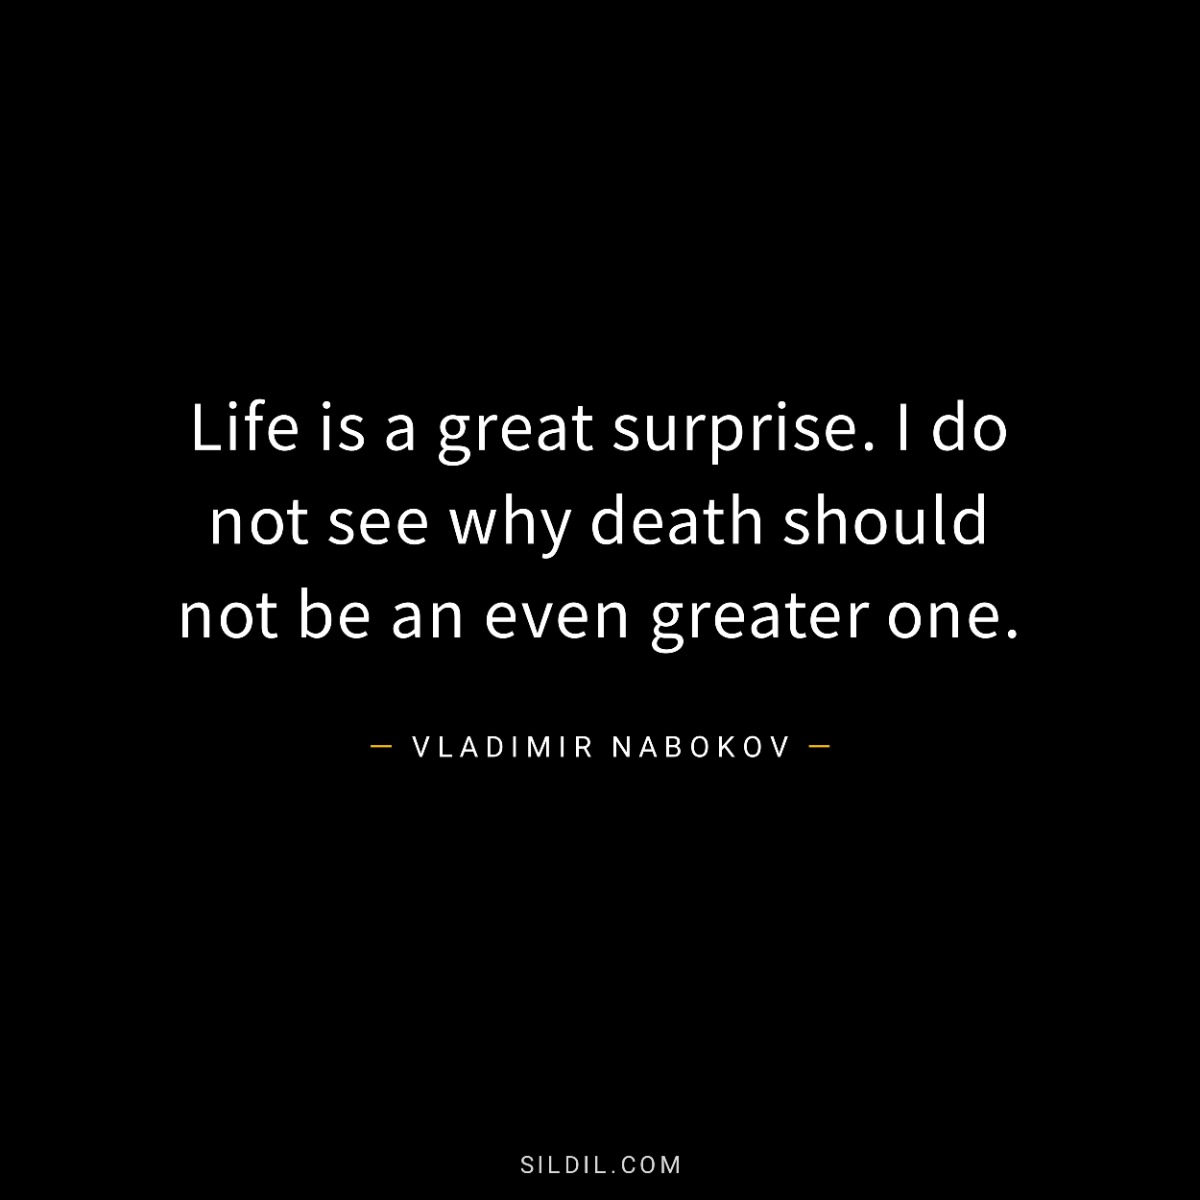 Life is a great surprise. I do not see why death should not be an even greater one.